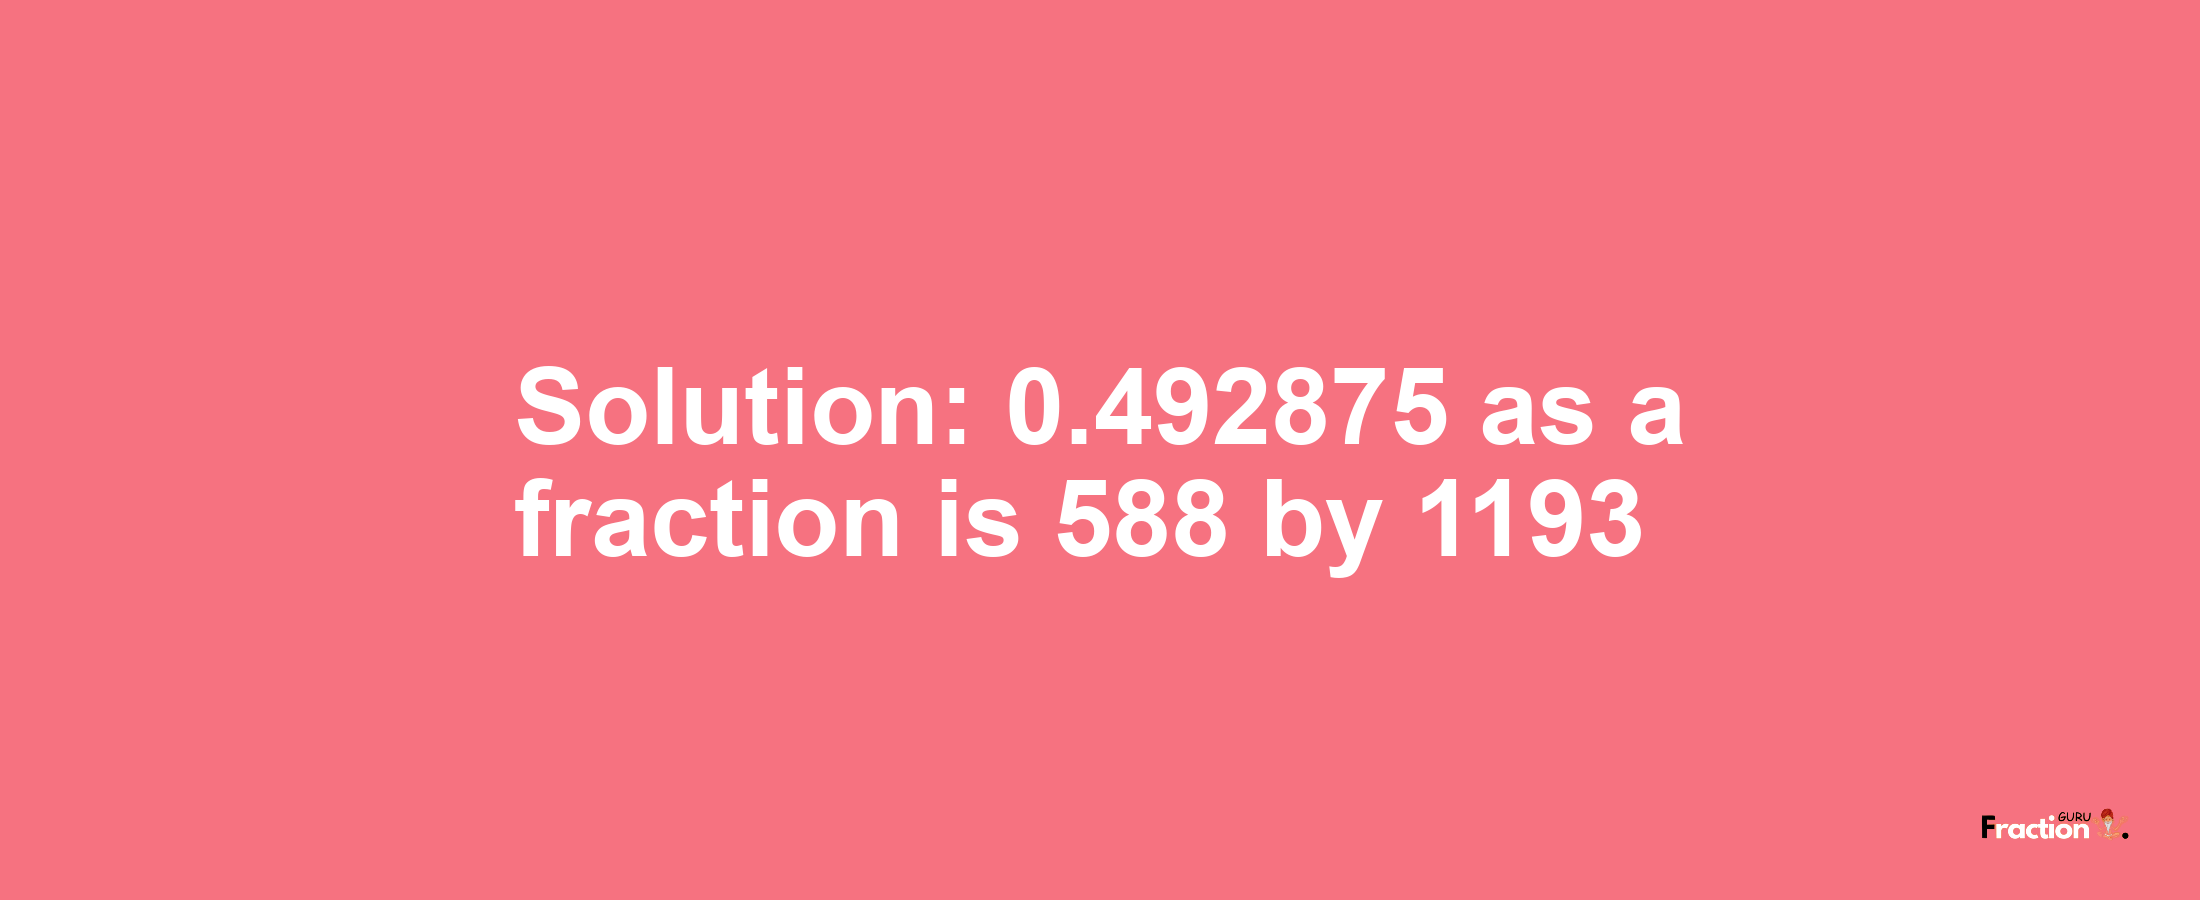 Solution:0.492875 as a fraction is 588/1193